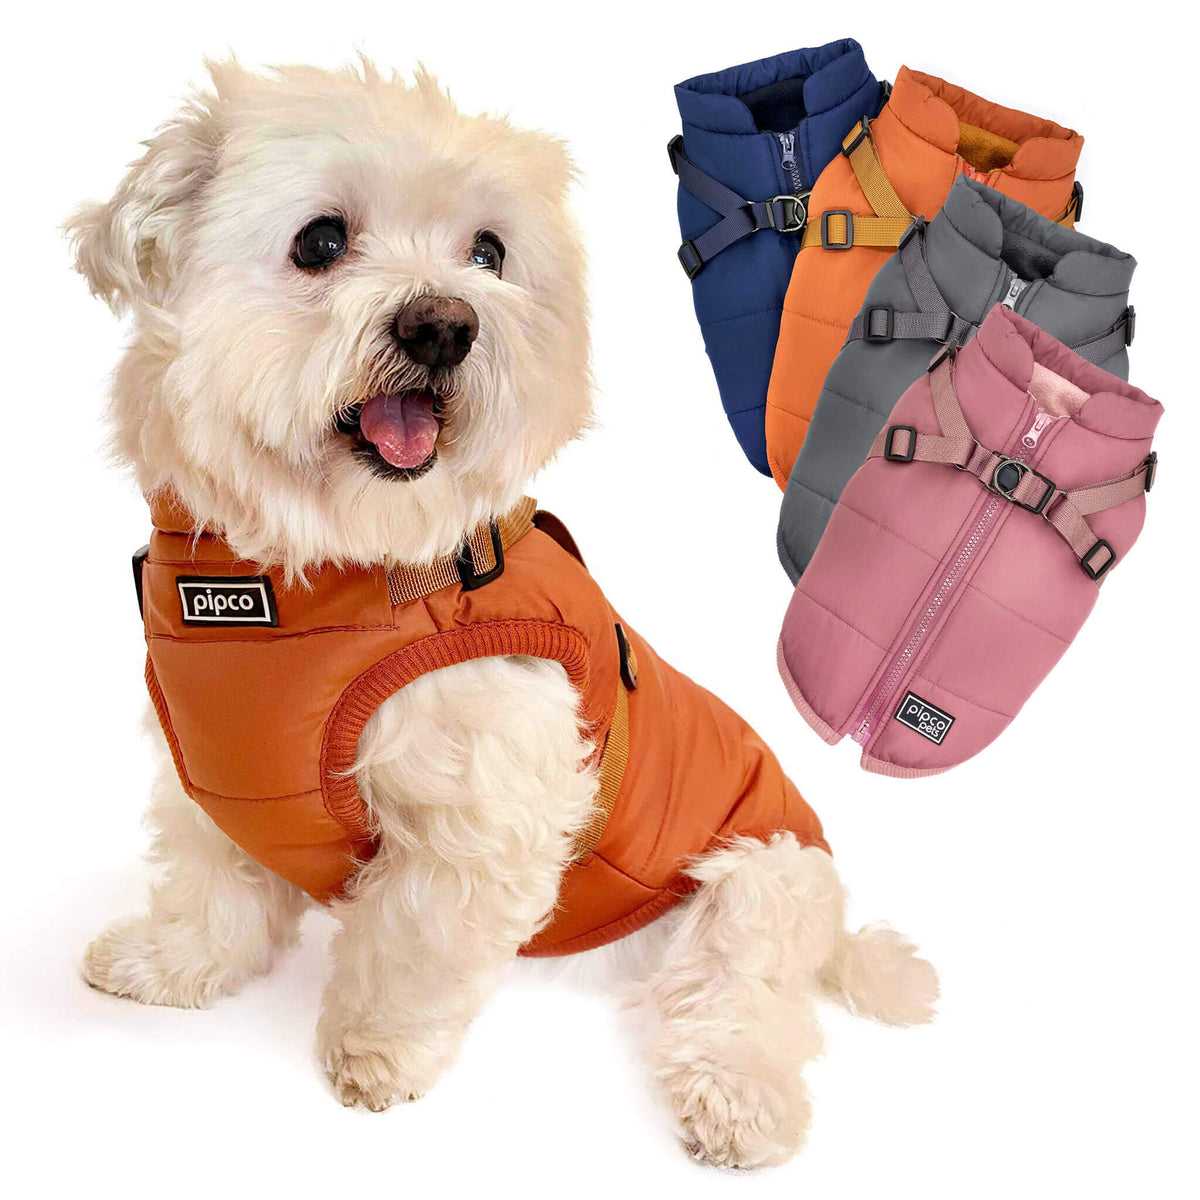 Dog model wearing orange Pipco puffer jacket with in-built harness